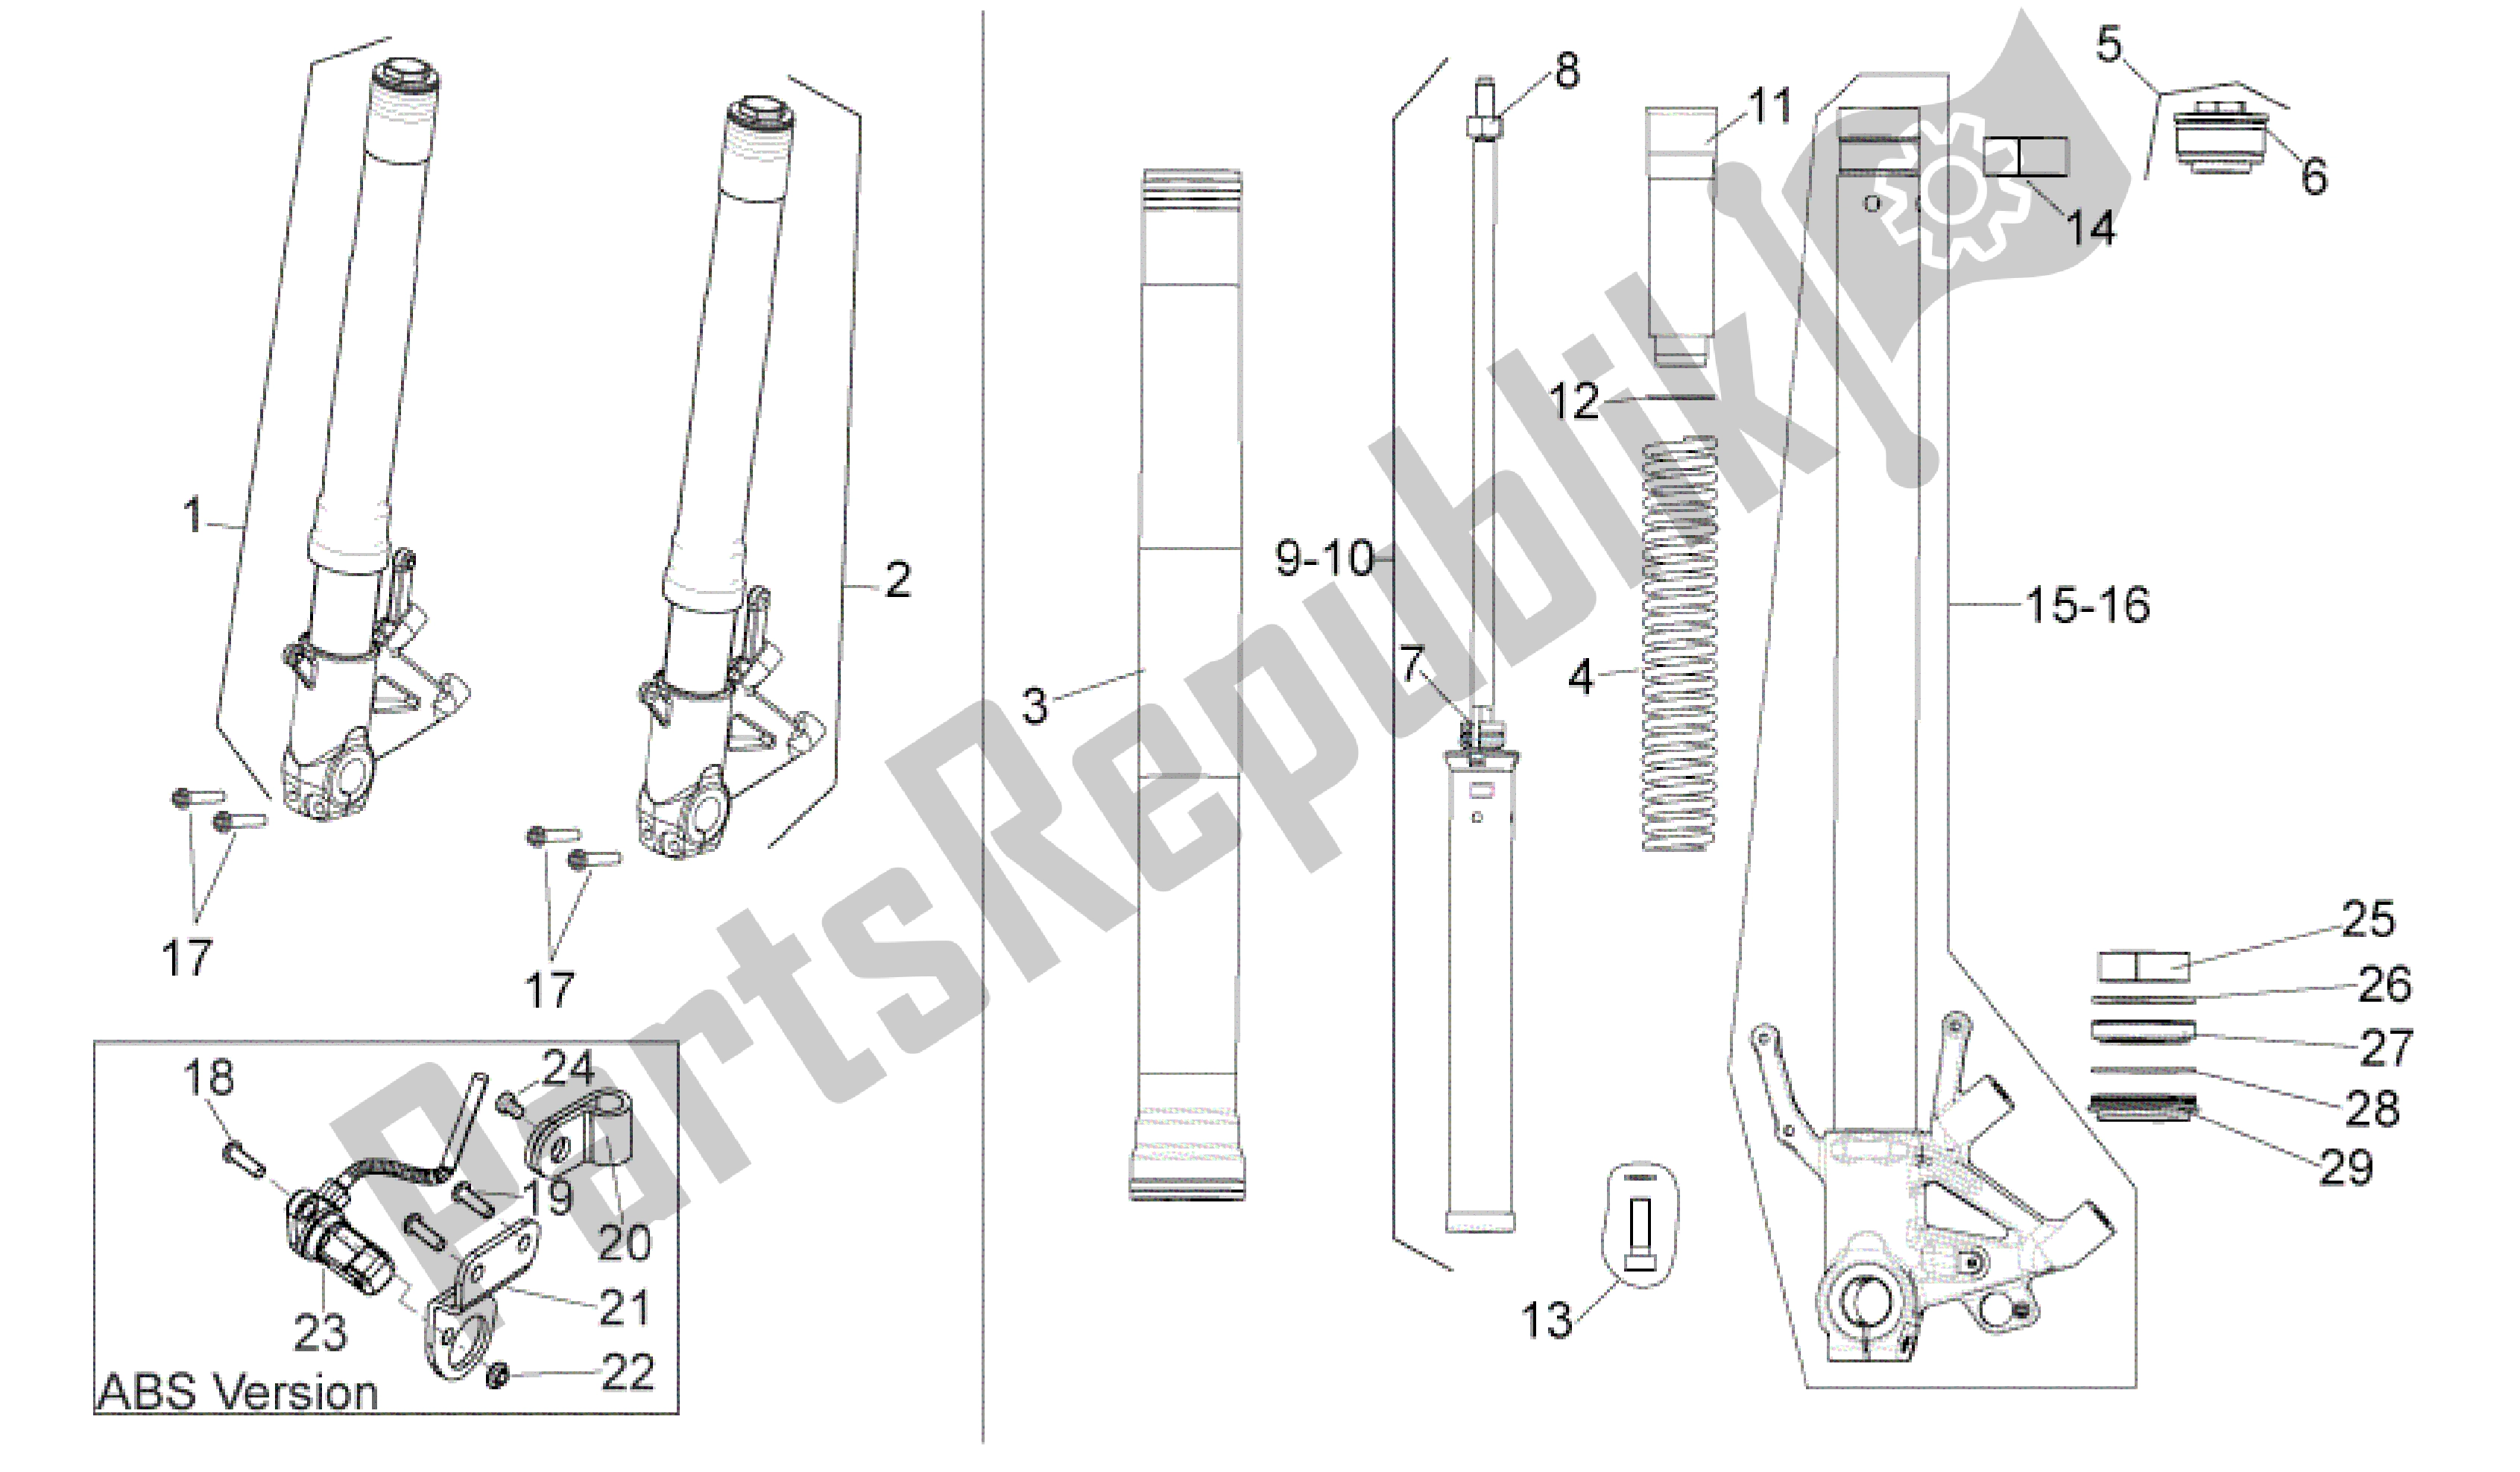 All parts for the Fron Fork Ii of the Aprilia Shiver 750 2007 - 2009